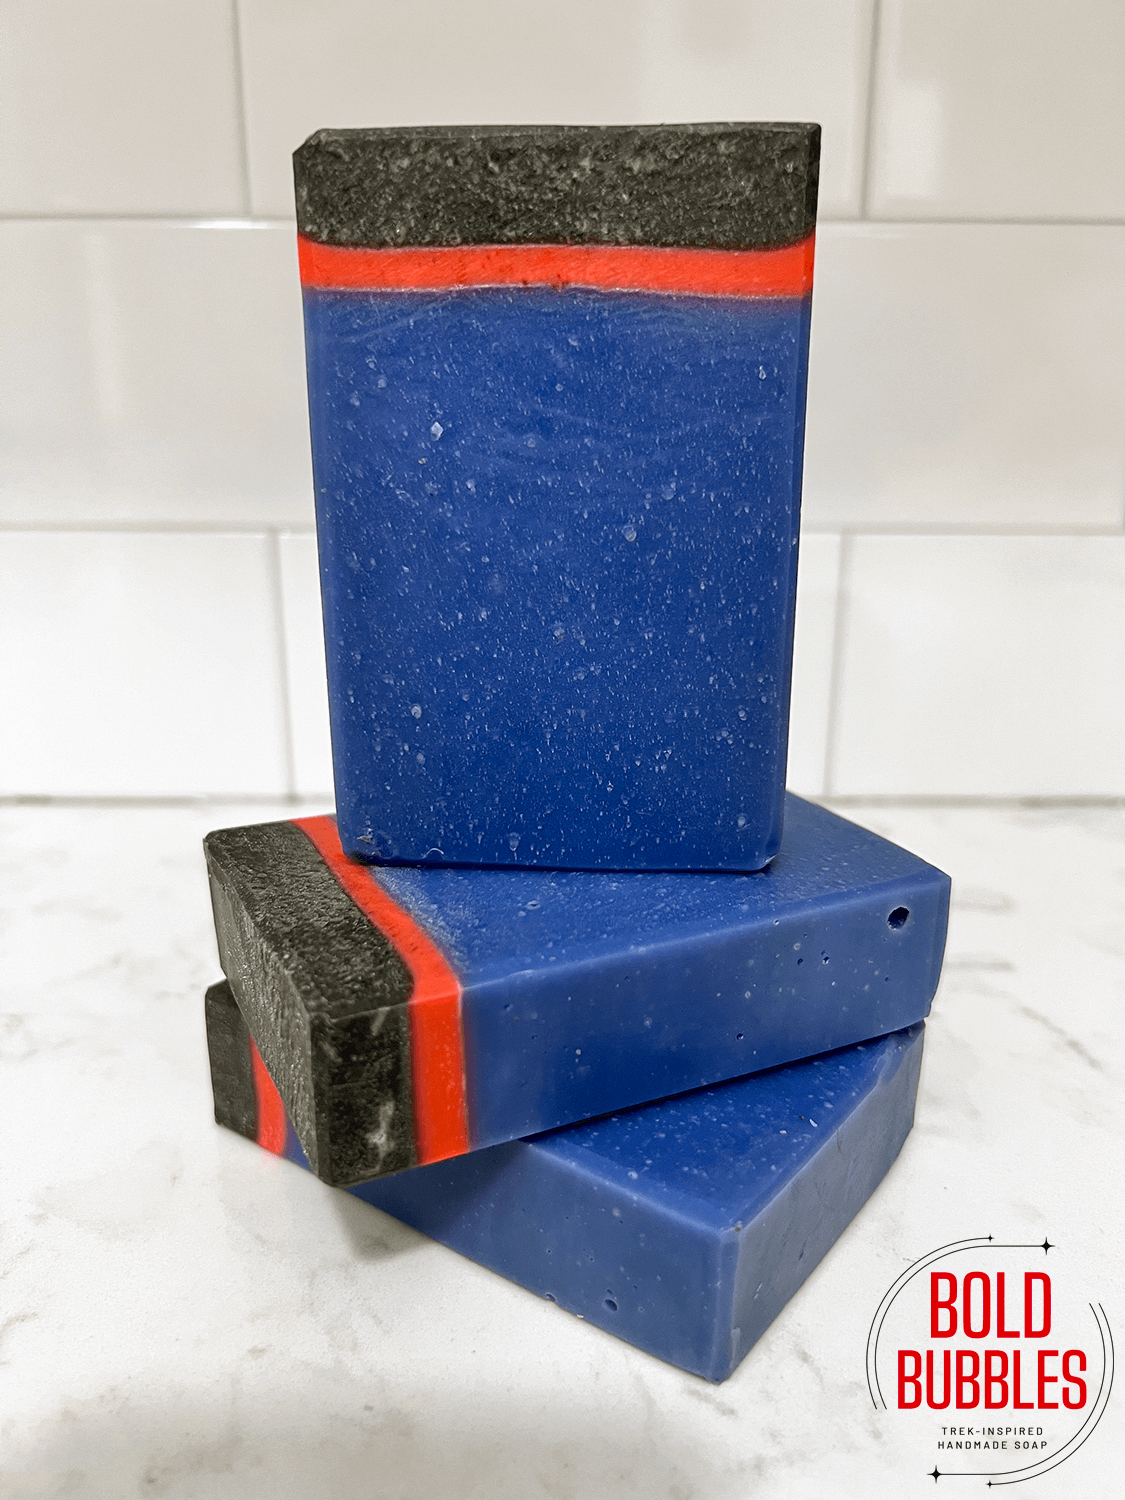 A blue, black and red bar of soap inspired by the uniform style worn by crew members in the Star Trek show "Enterprise."